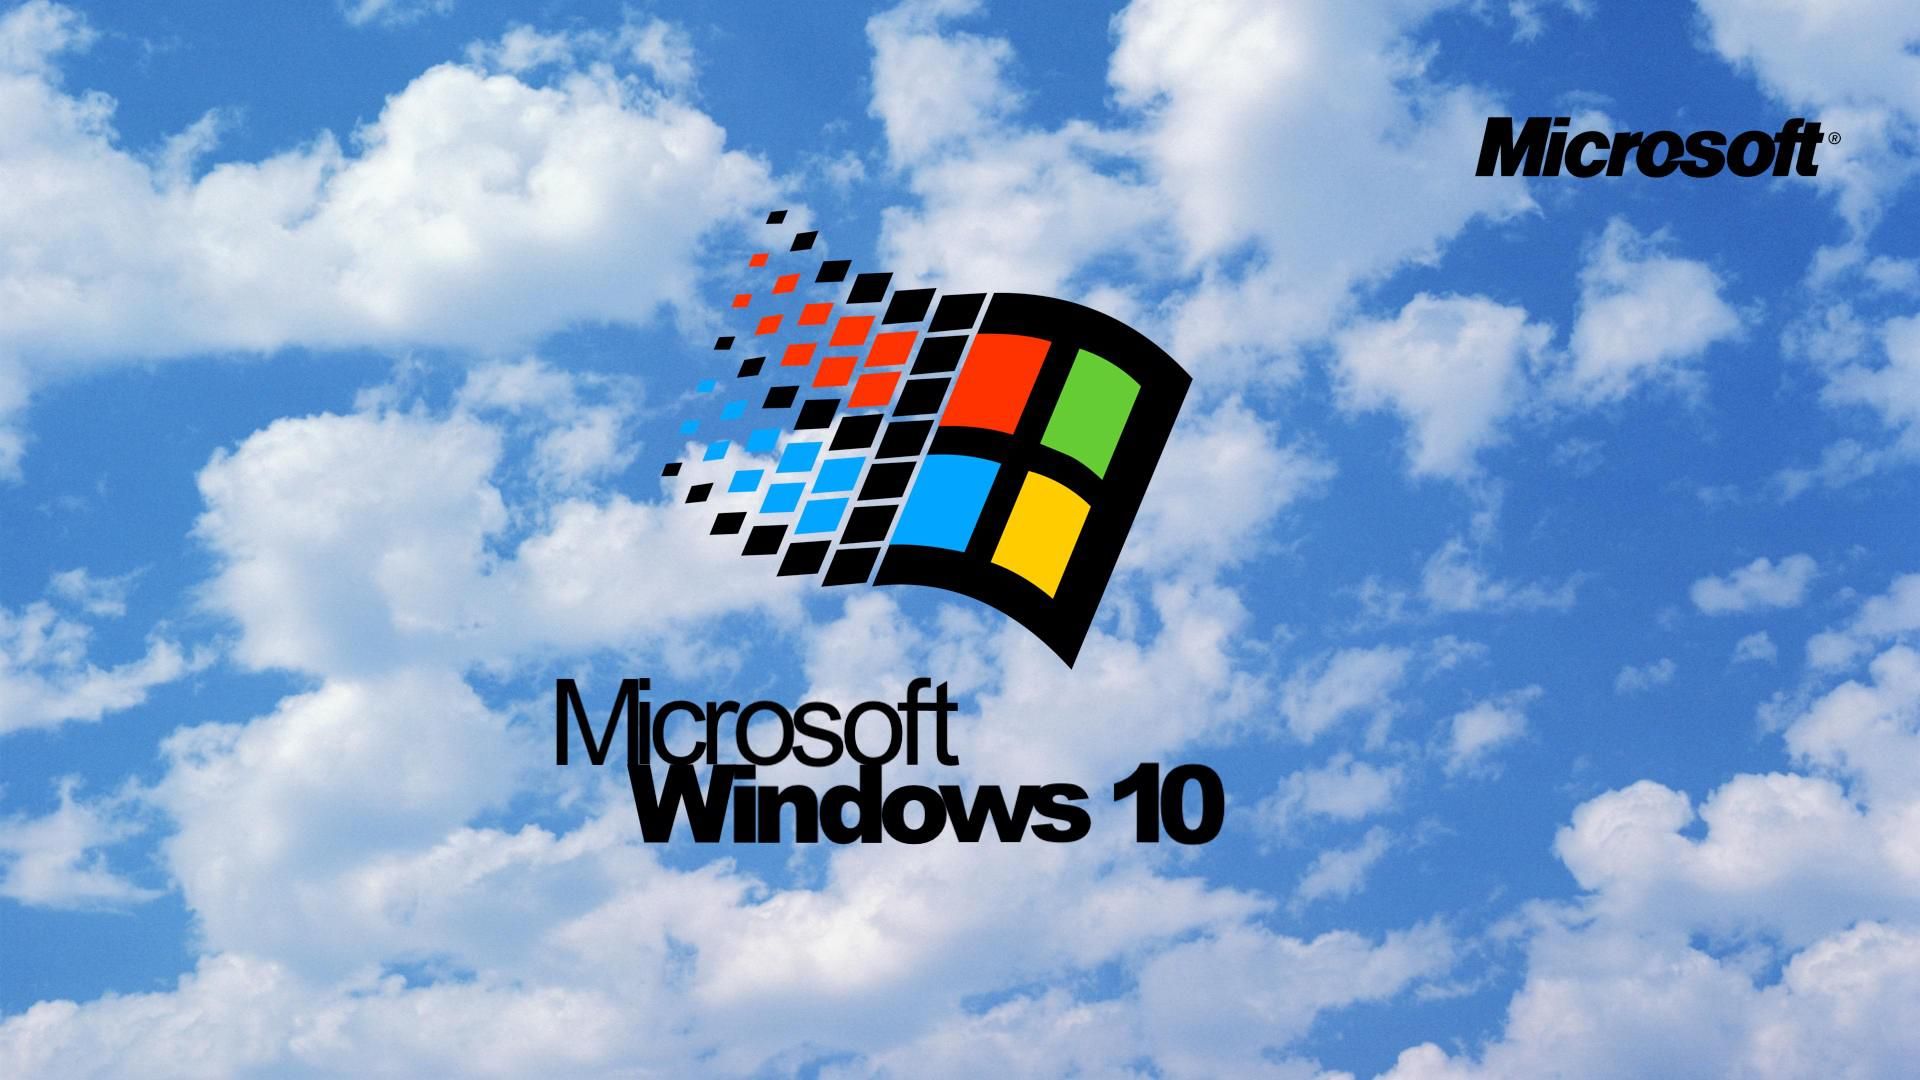 I Remade The Windows Wallpaper For In